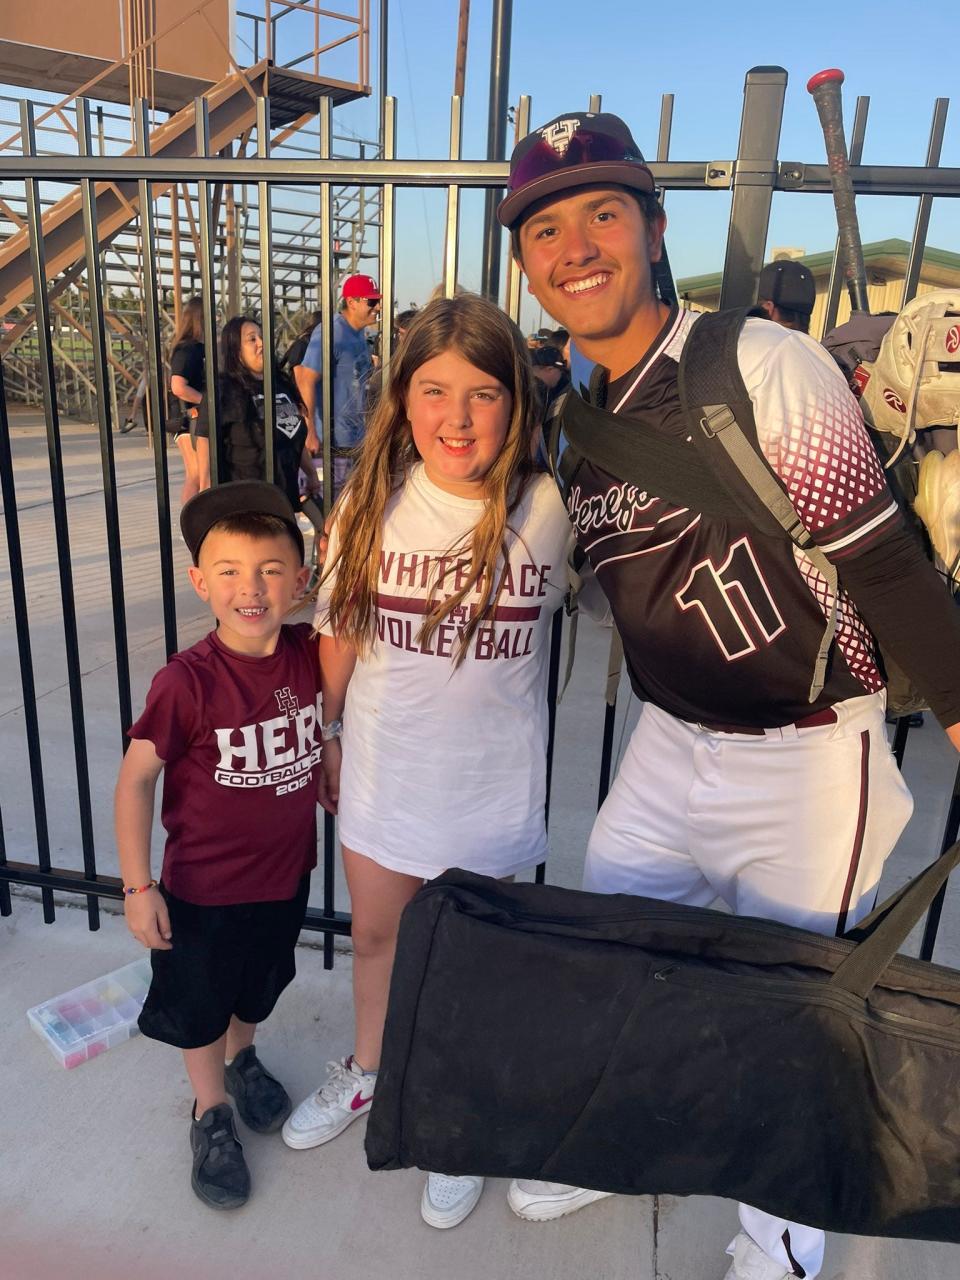 Hereford's Carlos Duran poses with two young fans after a game.